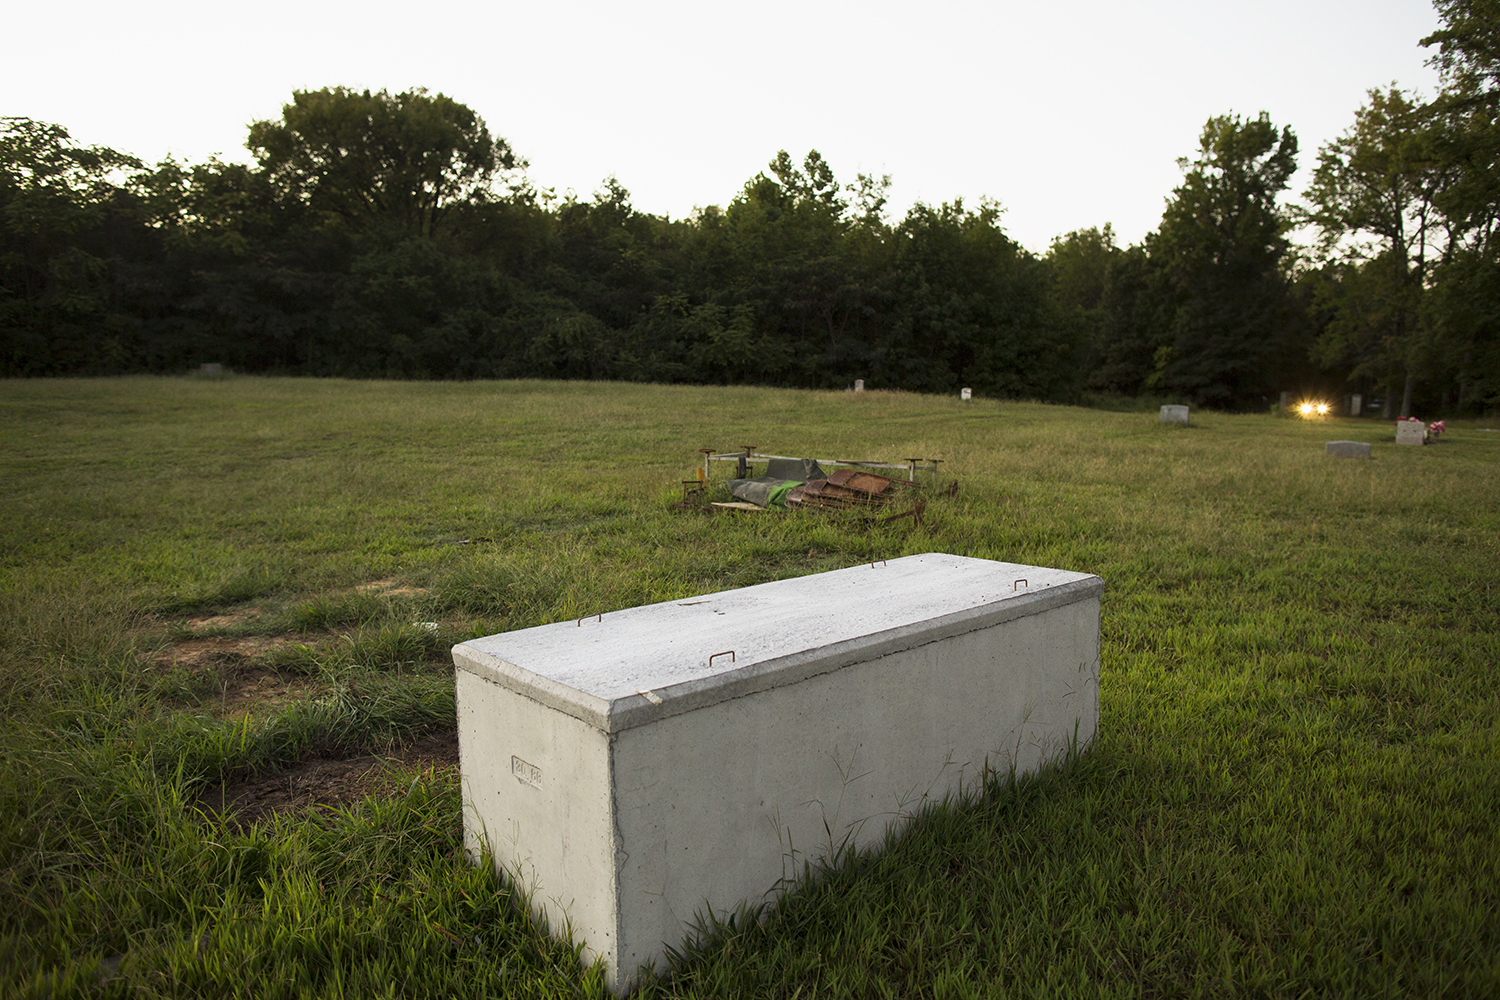  Concrete container for casket in center section, Evergreen Cemetery, Richmond, VA, September 14, 2015 